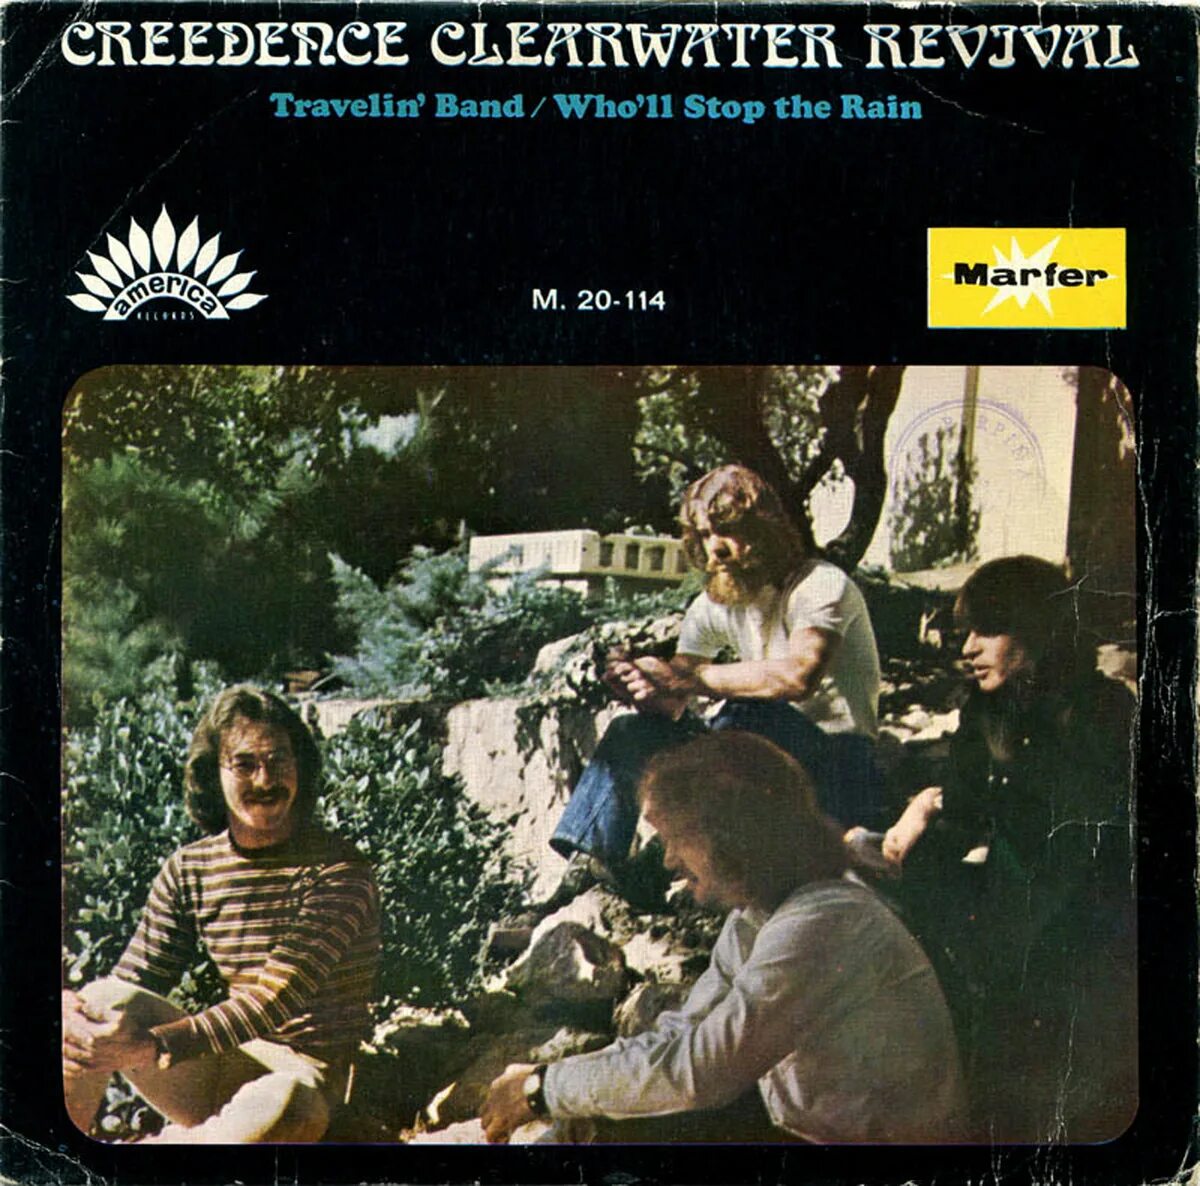 Creedence clearwater revival rain. Creedence Clearwater Revival Travelin' Band. Creedence Clearwater Revival – Travelin’ Band (2022). Creedence Clearwater Revival who'll stop the Rain. Creedence stop the Rain.